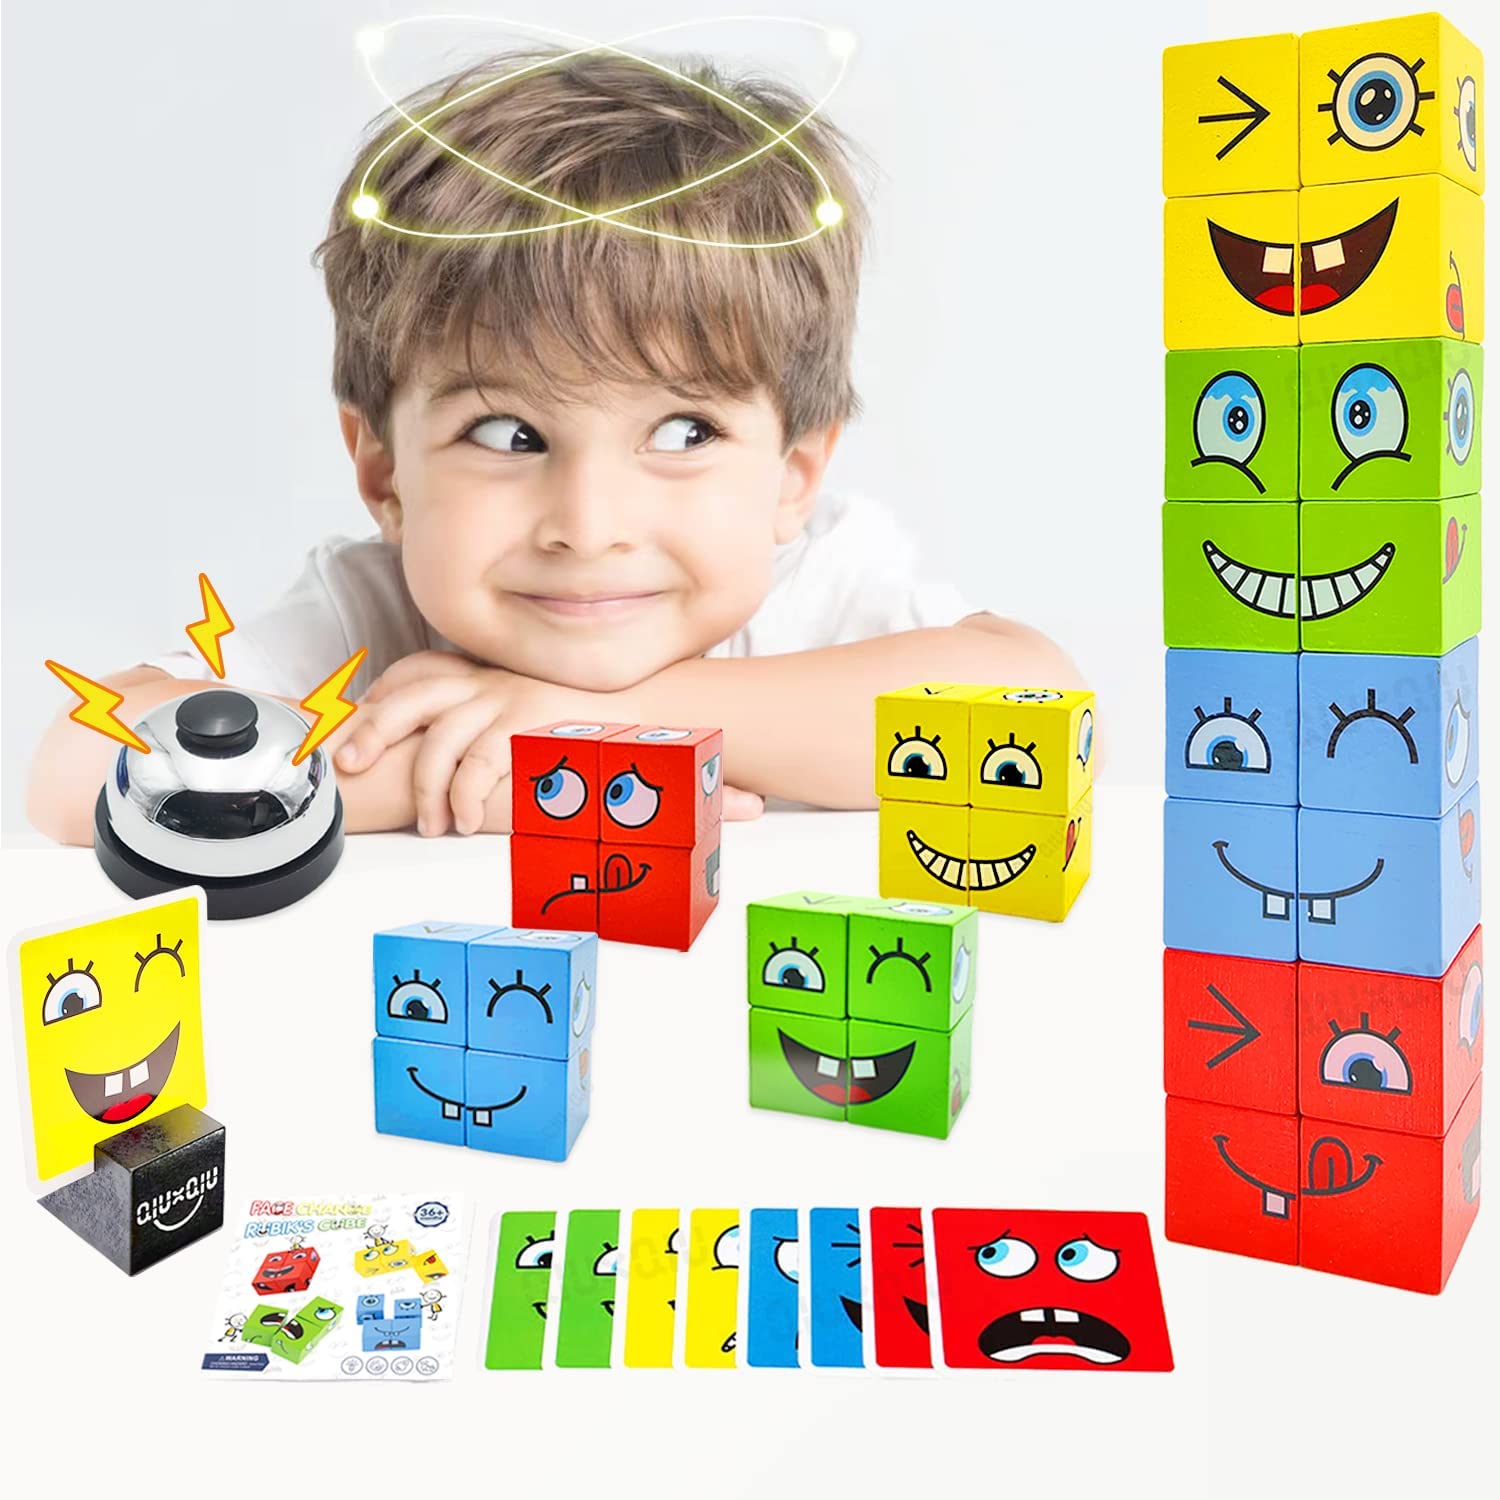 QIUXQIU Wooden Expressions Matching Block Puzzles Cute Geometric Emoji Building Blocks with Bell Educational Montessori Toys Parent-Child Board Games for Ages 3 Years and Up Kids Birthday Gift 